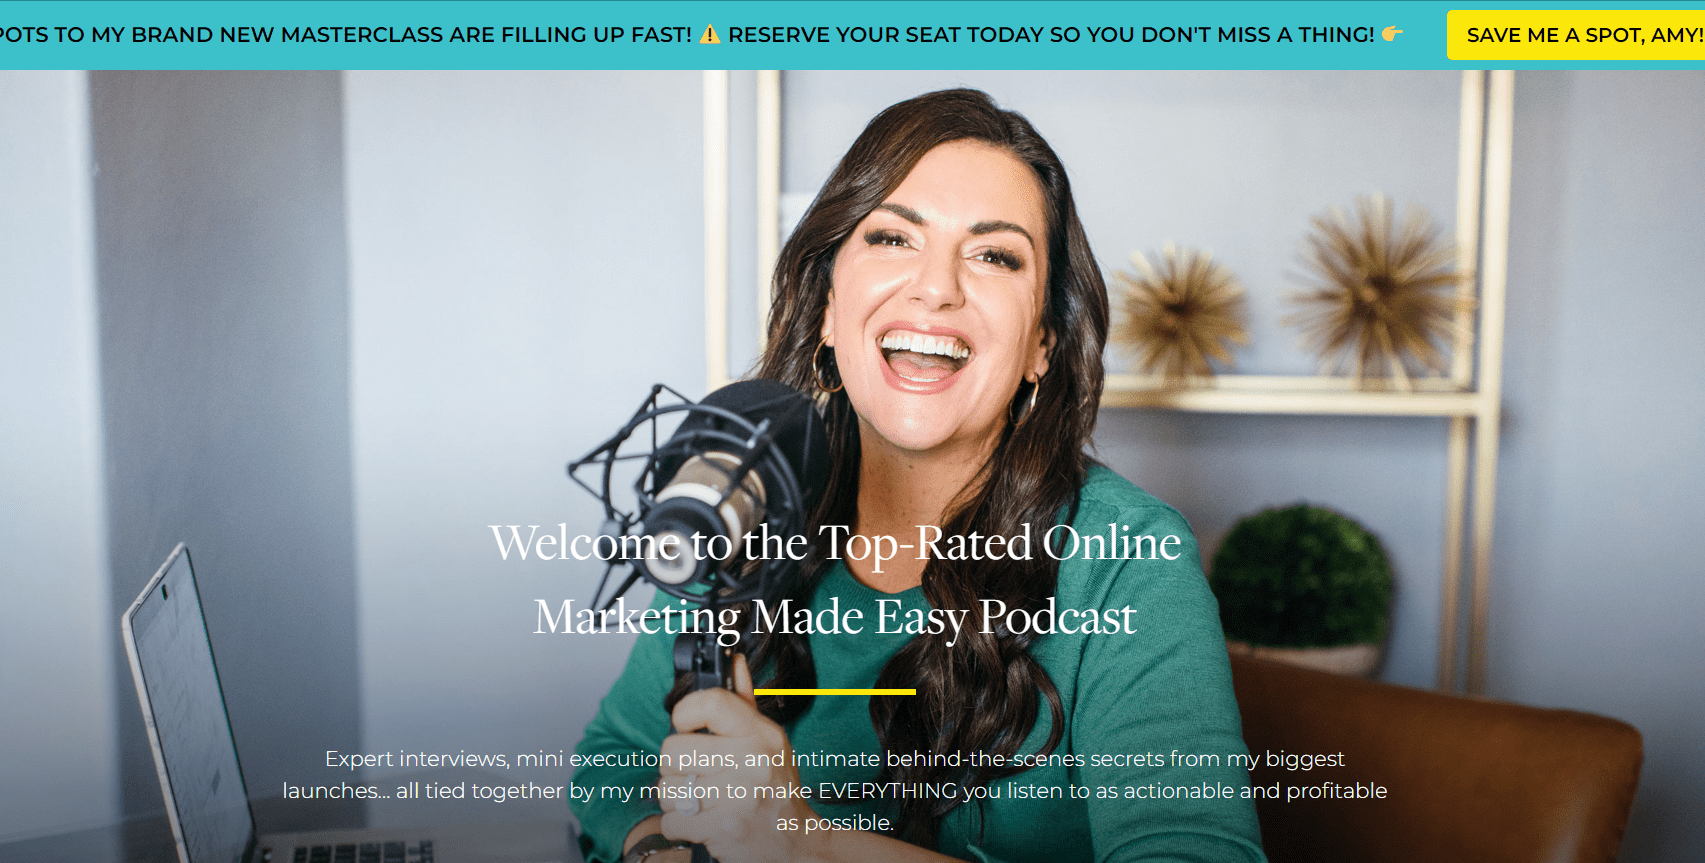 online marketing made easy by Amy Porterfield